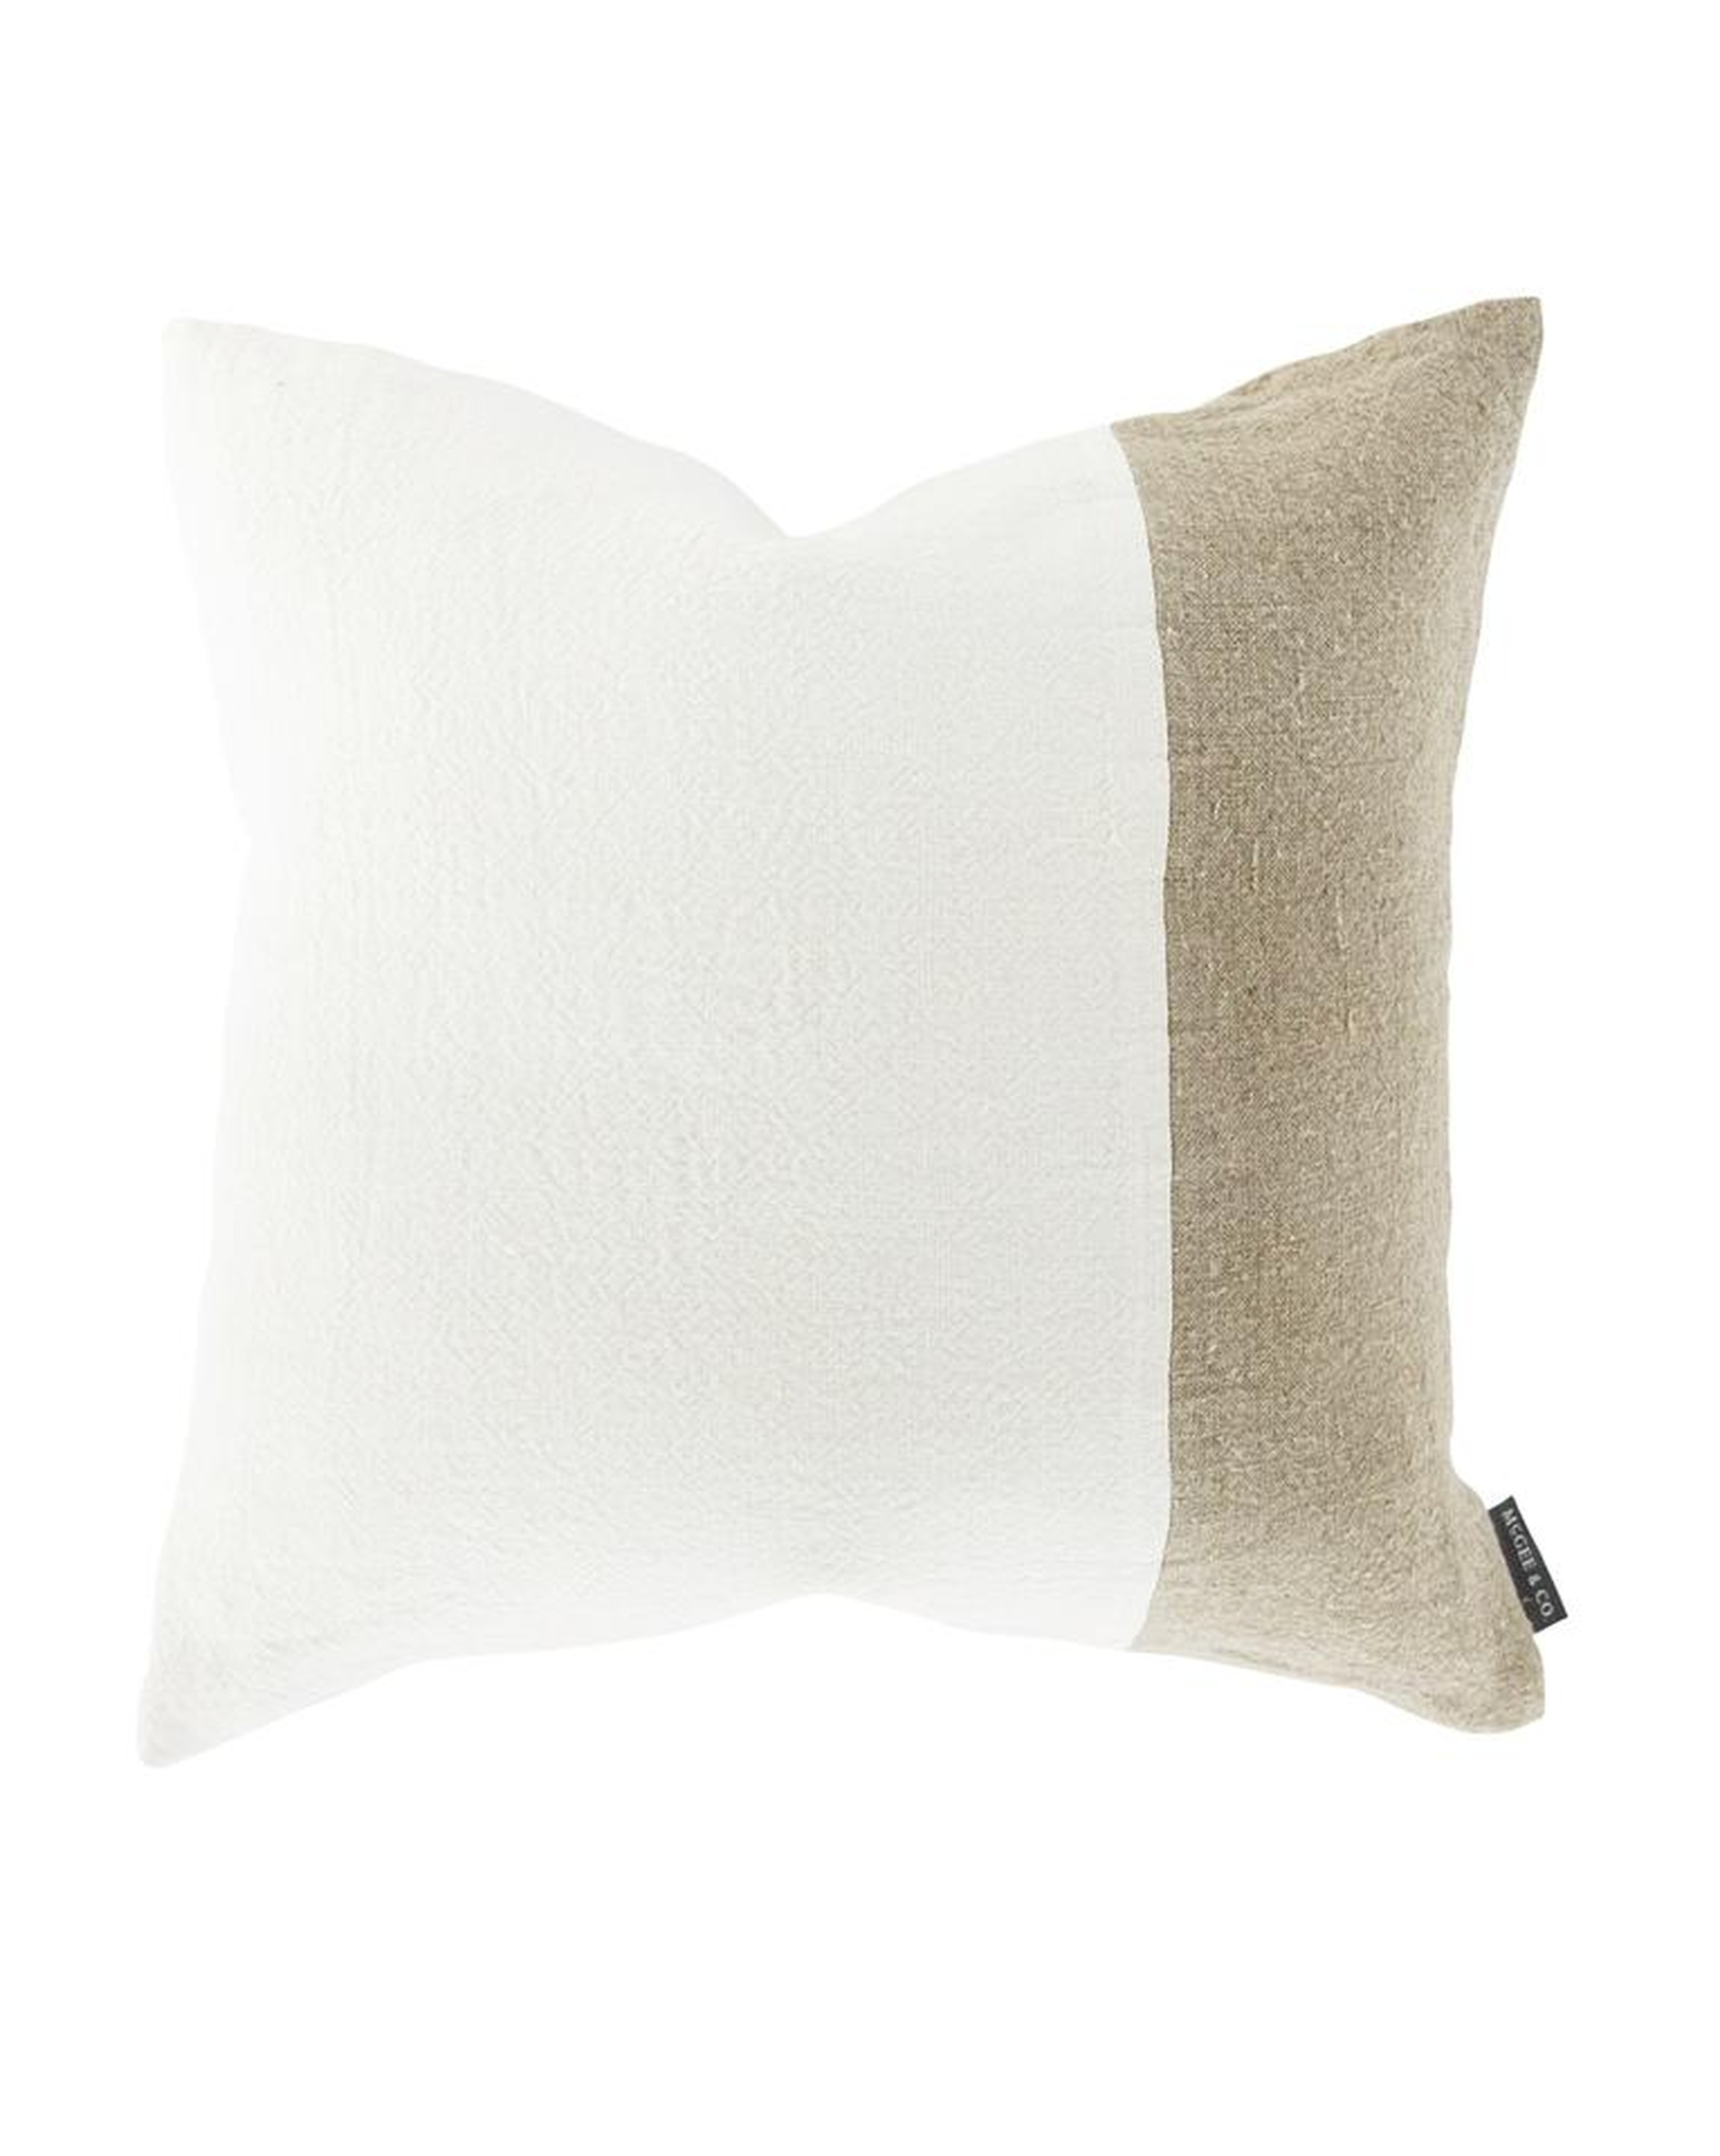 Gina Patched Linen Pillow Cover, 20" x 20" - McGee & Co.